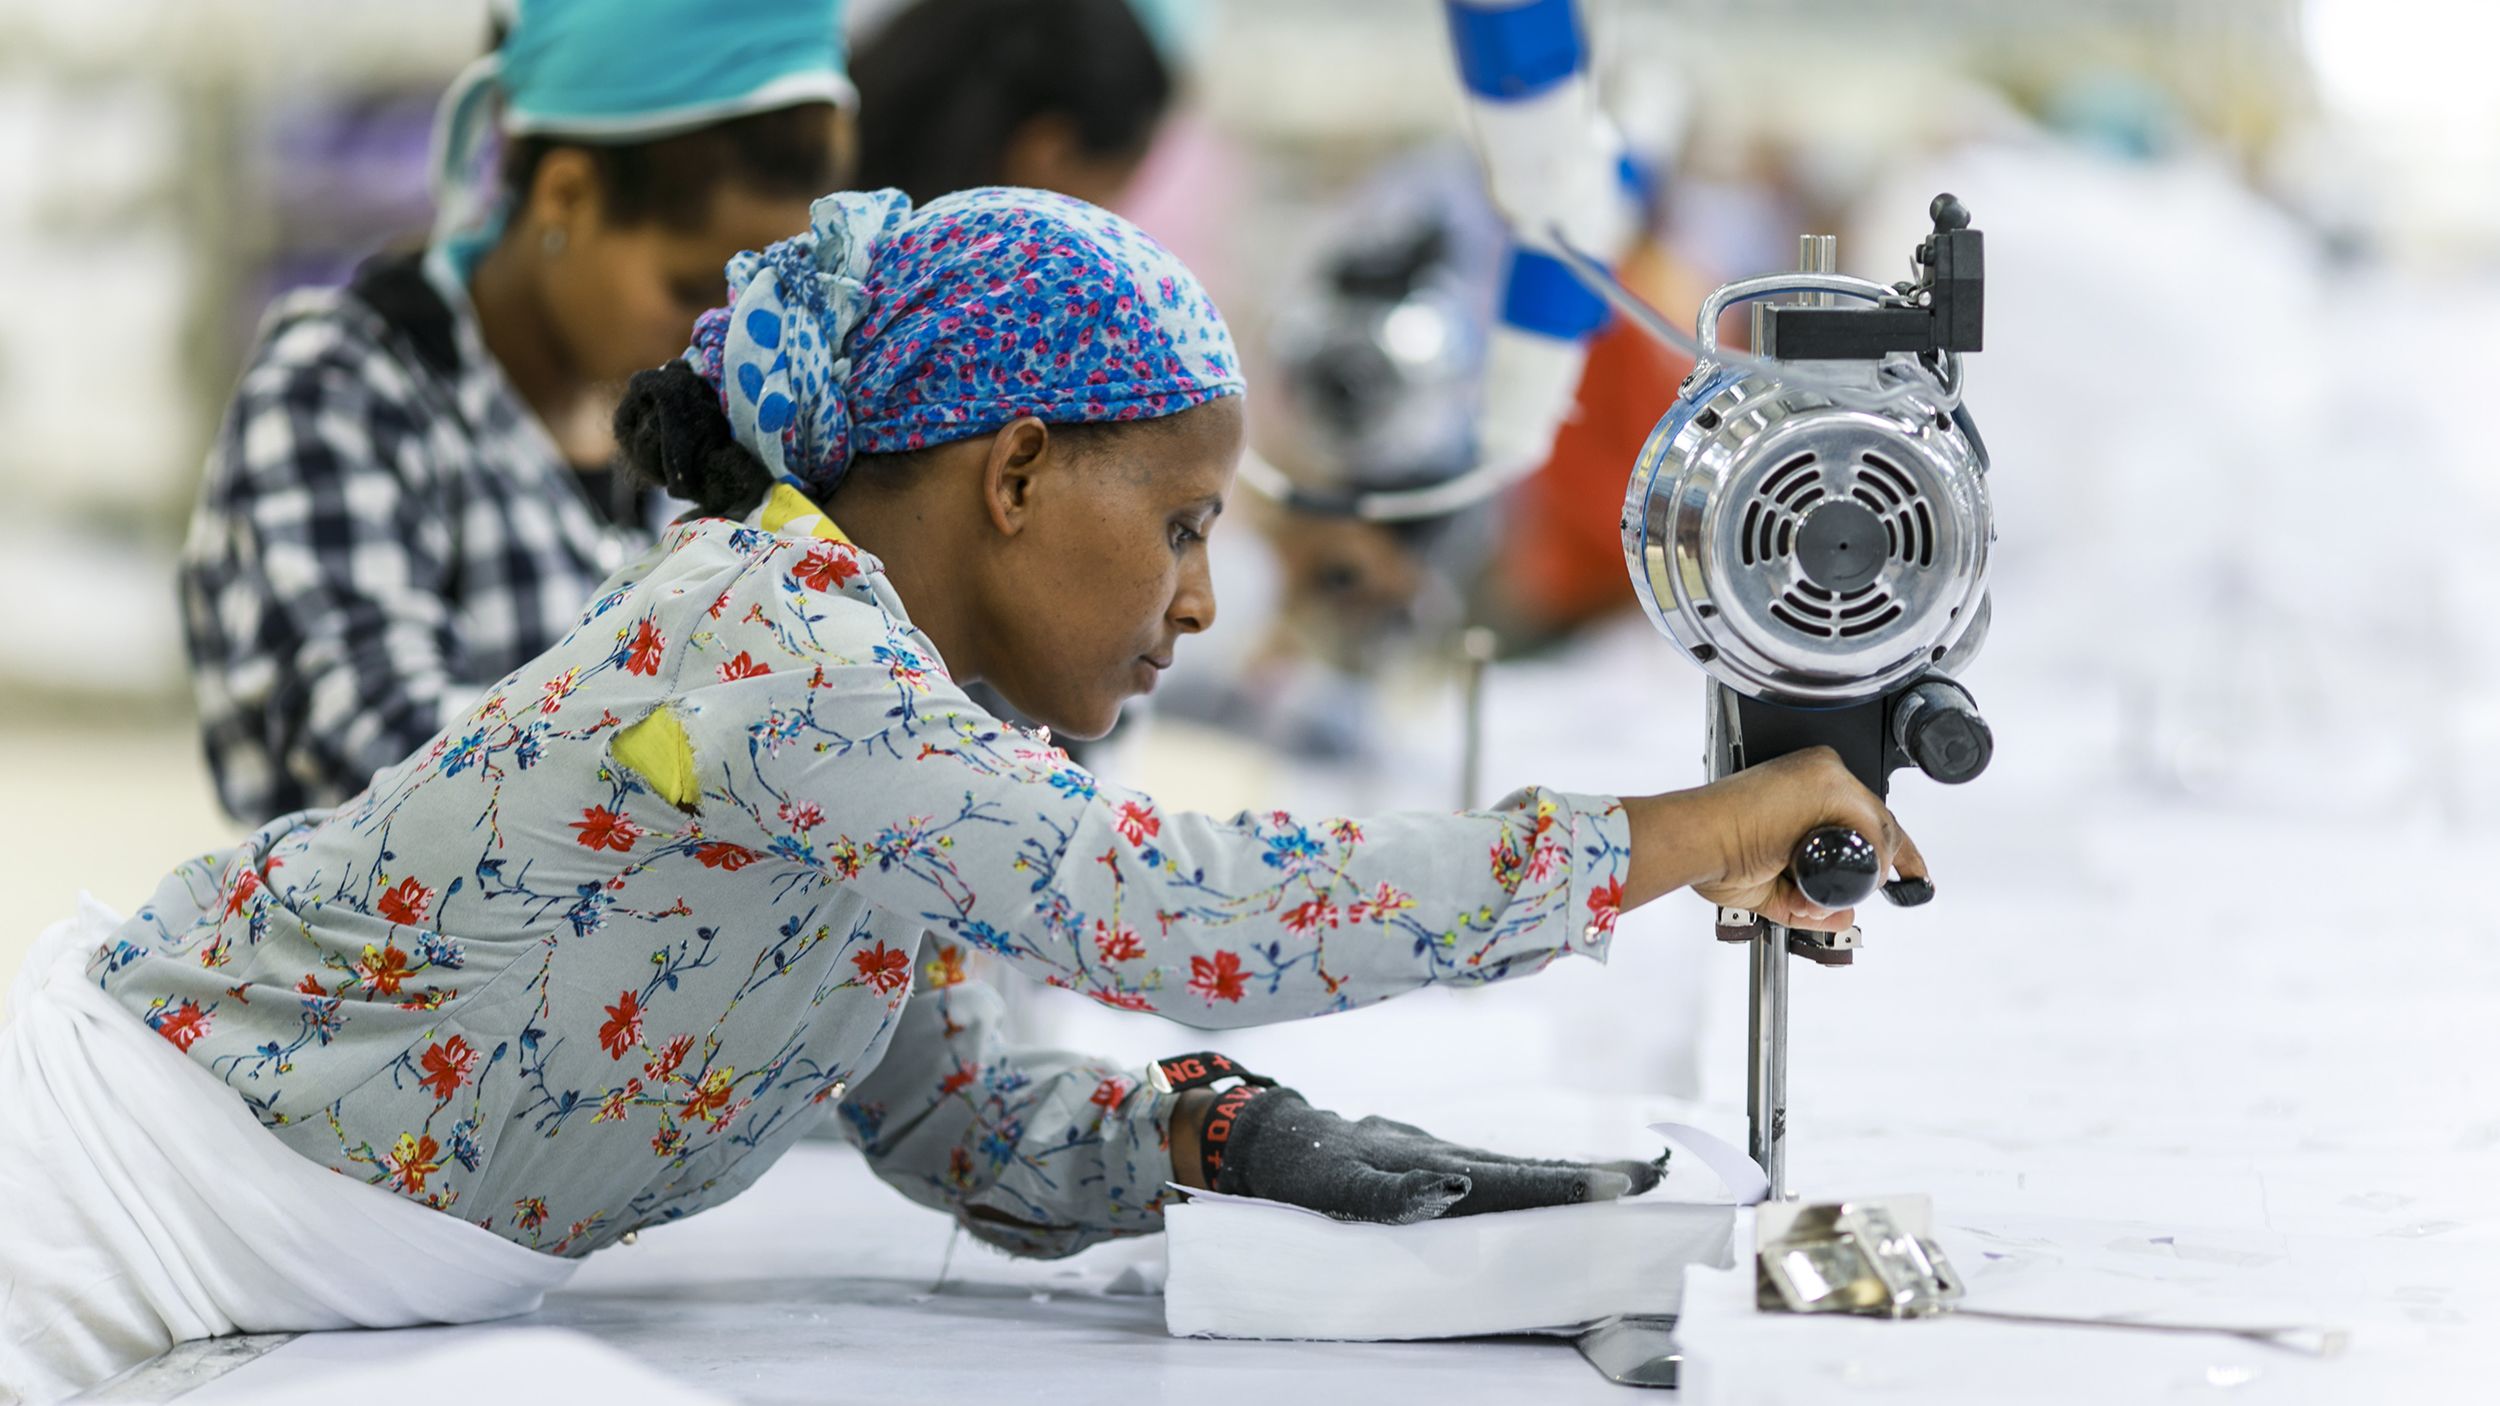 Ethiopia's garment workers make clothes for some of the world's largest  clothing brands but get paid the lowest